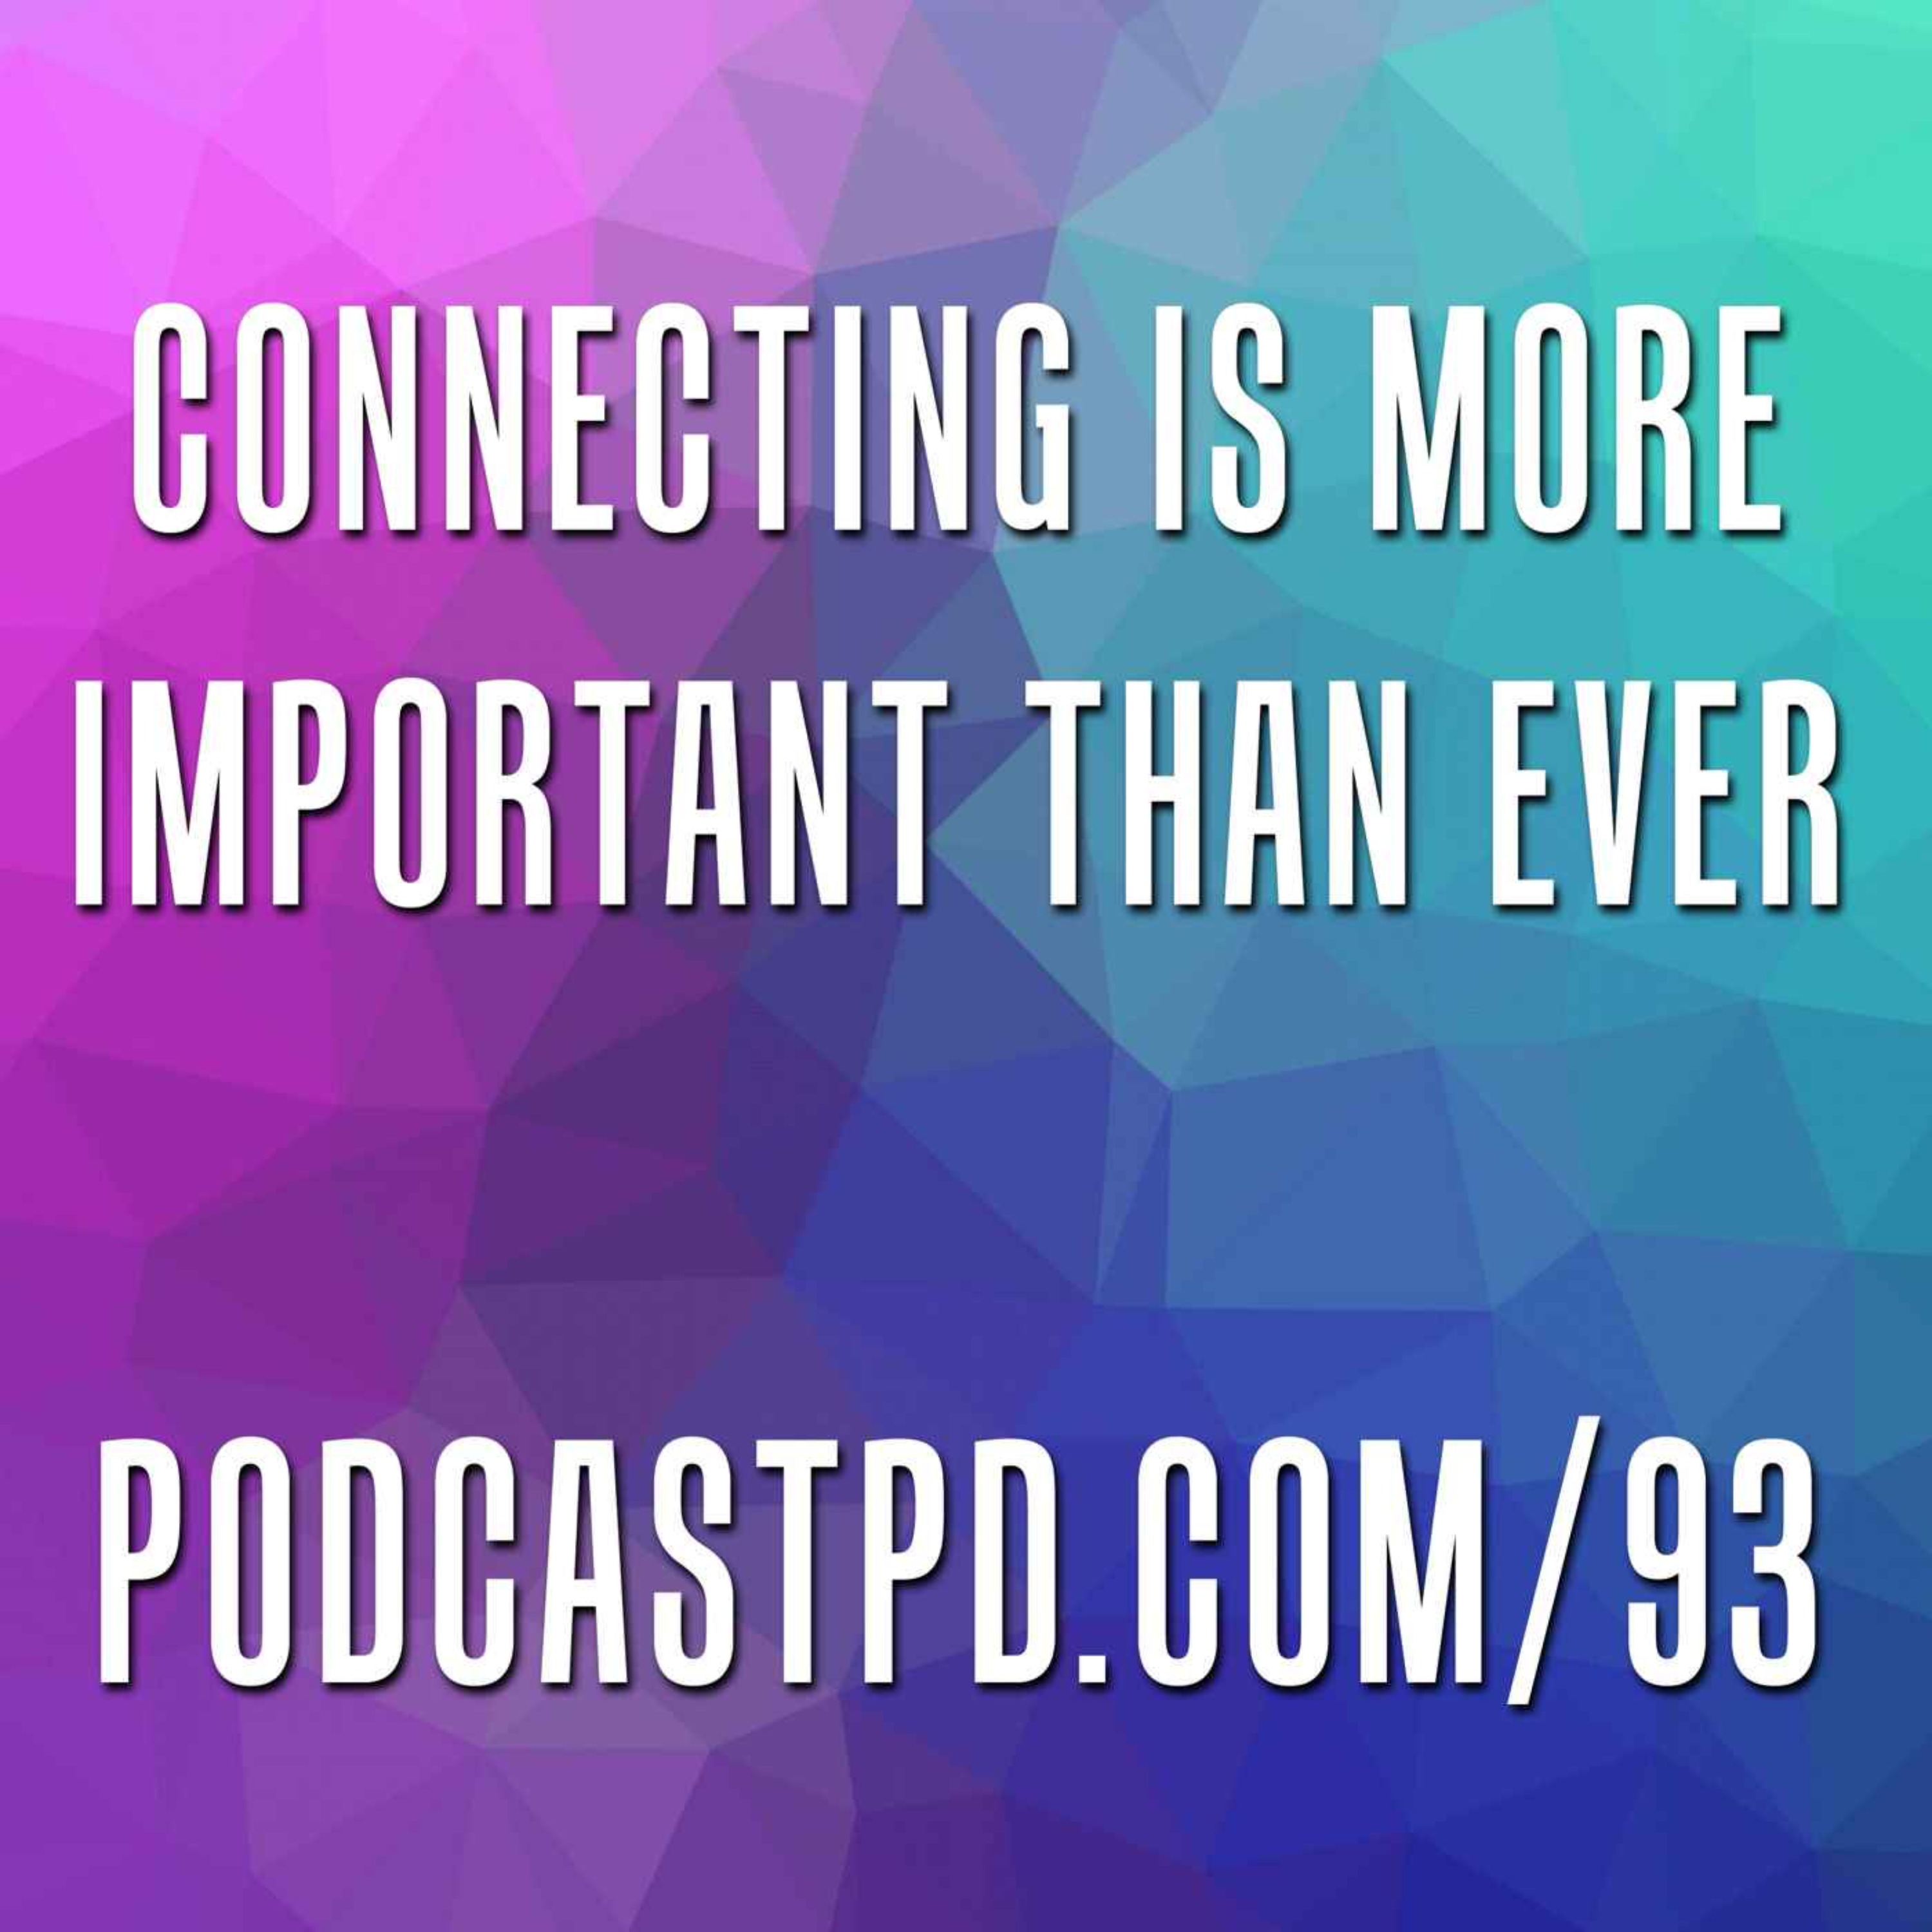 Connecting Is More Important Than Ever - PPD093 Image